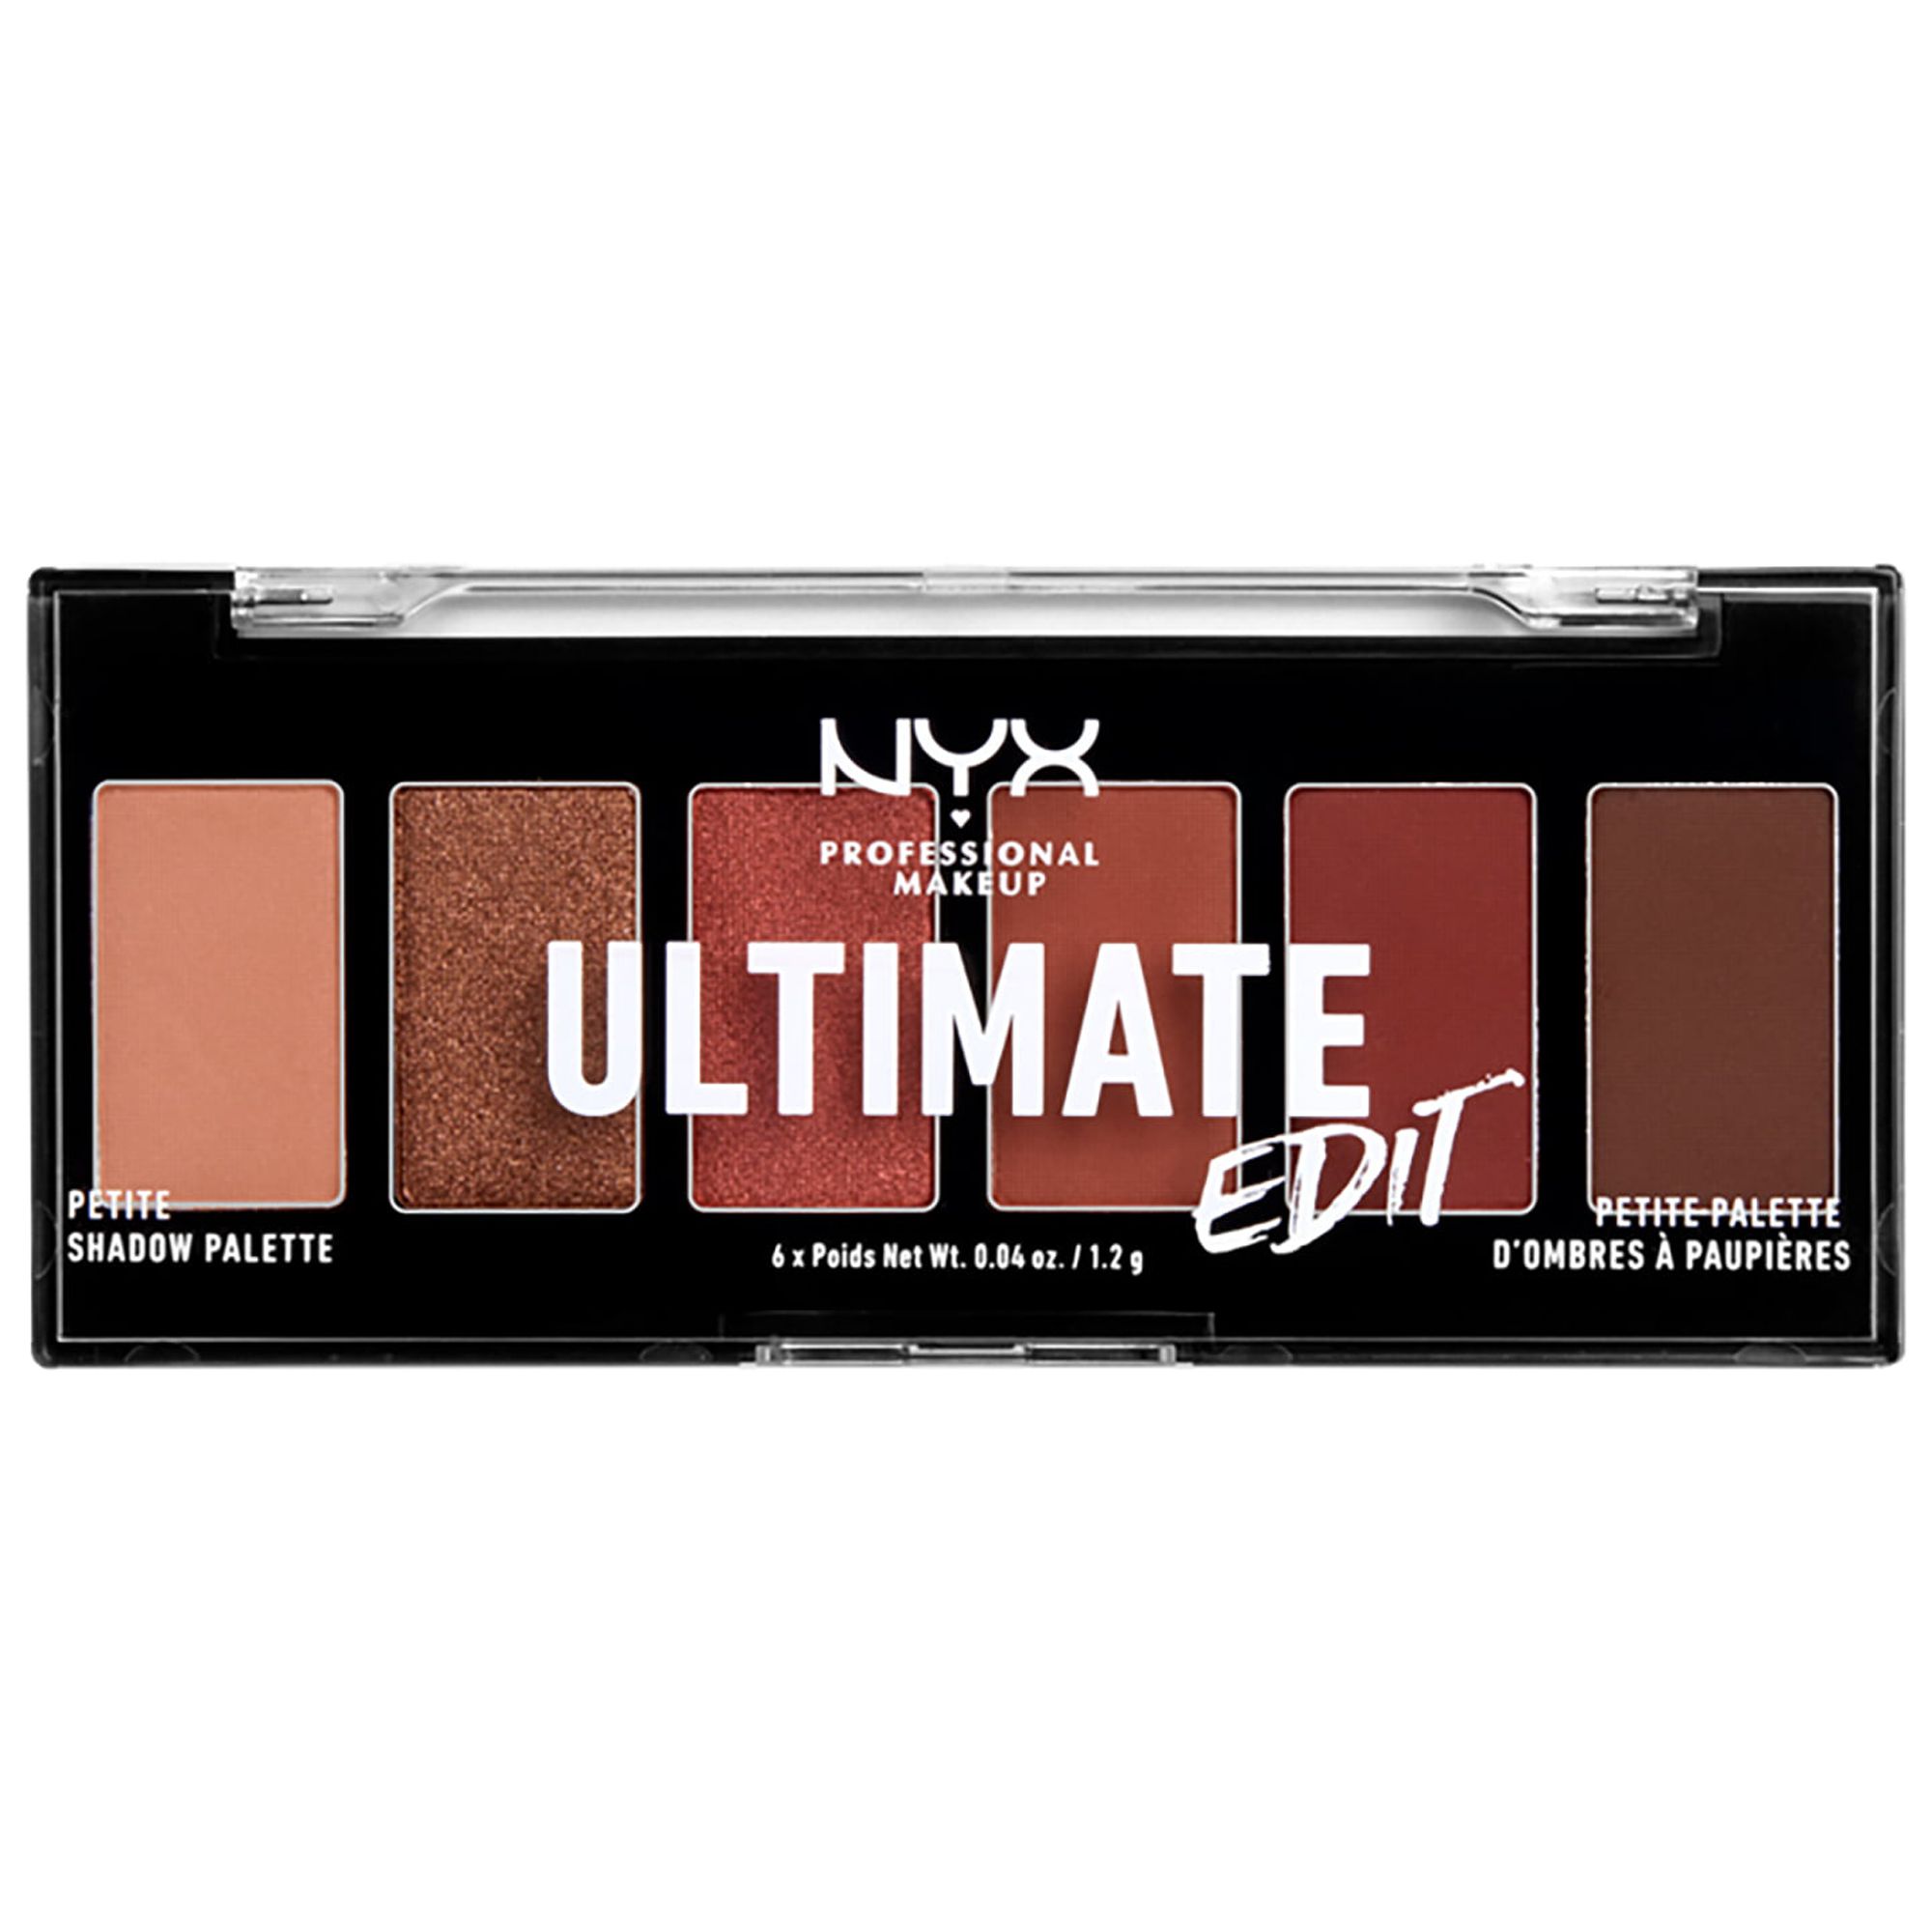 NYX Professional Makeup Ultimate Edit Petite Shadow Palette, Warm Neutrals - image 1 of 7